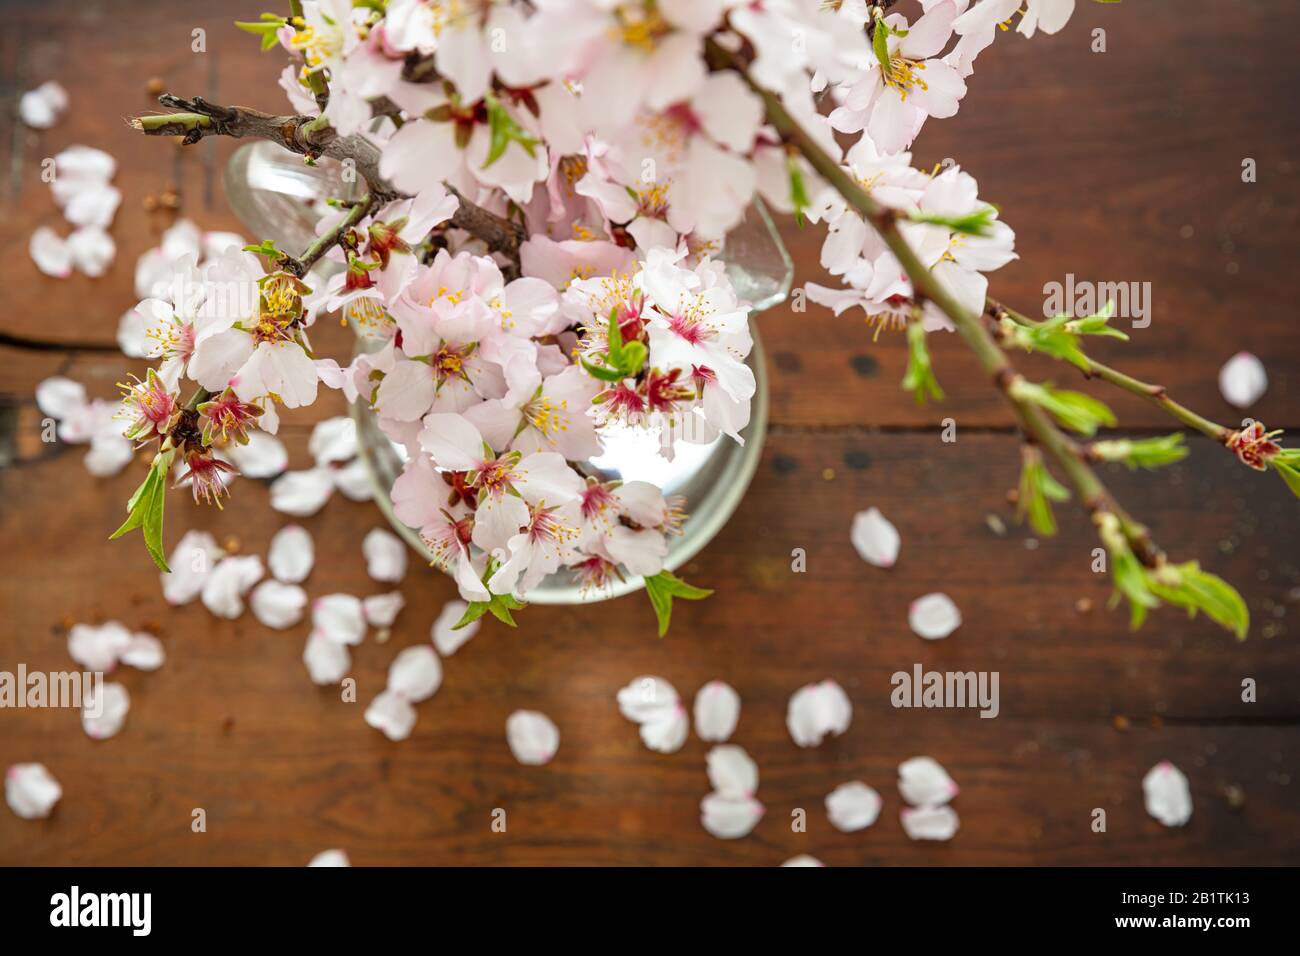 Almond tree twig blossoming, flowers and fresh green leaves, close up view. Springtime seasonal natural decoration, bouquet in a vase, wood table back Stock Photo